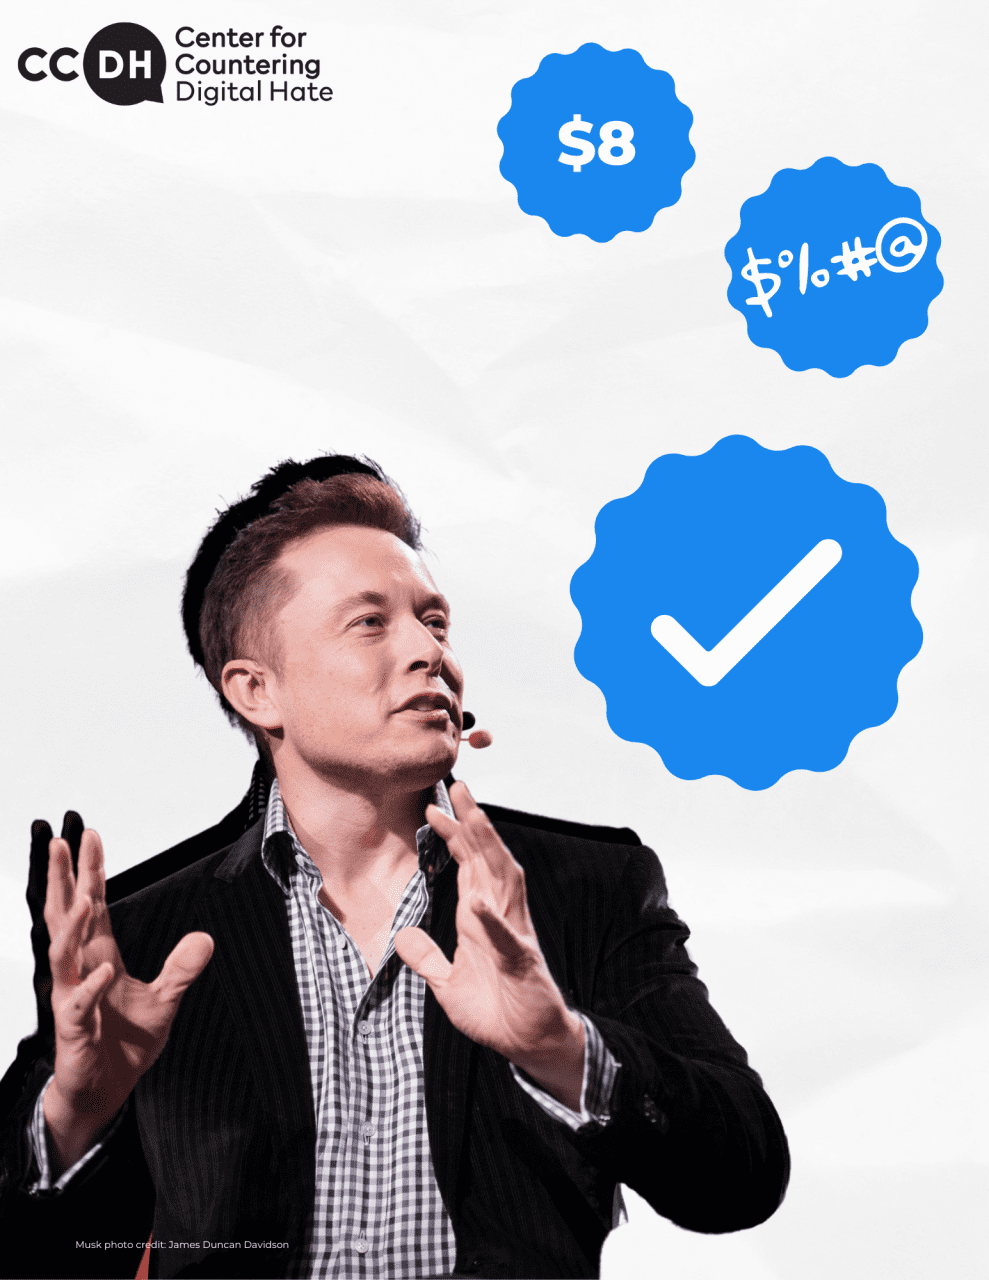 Montage of Elon Musk next to Twitter's Blue Tick symbol and a representation of the symbol with $8 and exclamation marks to represent swearing.